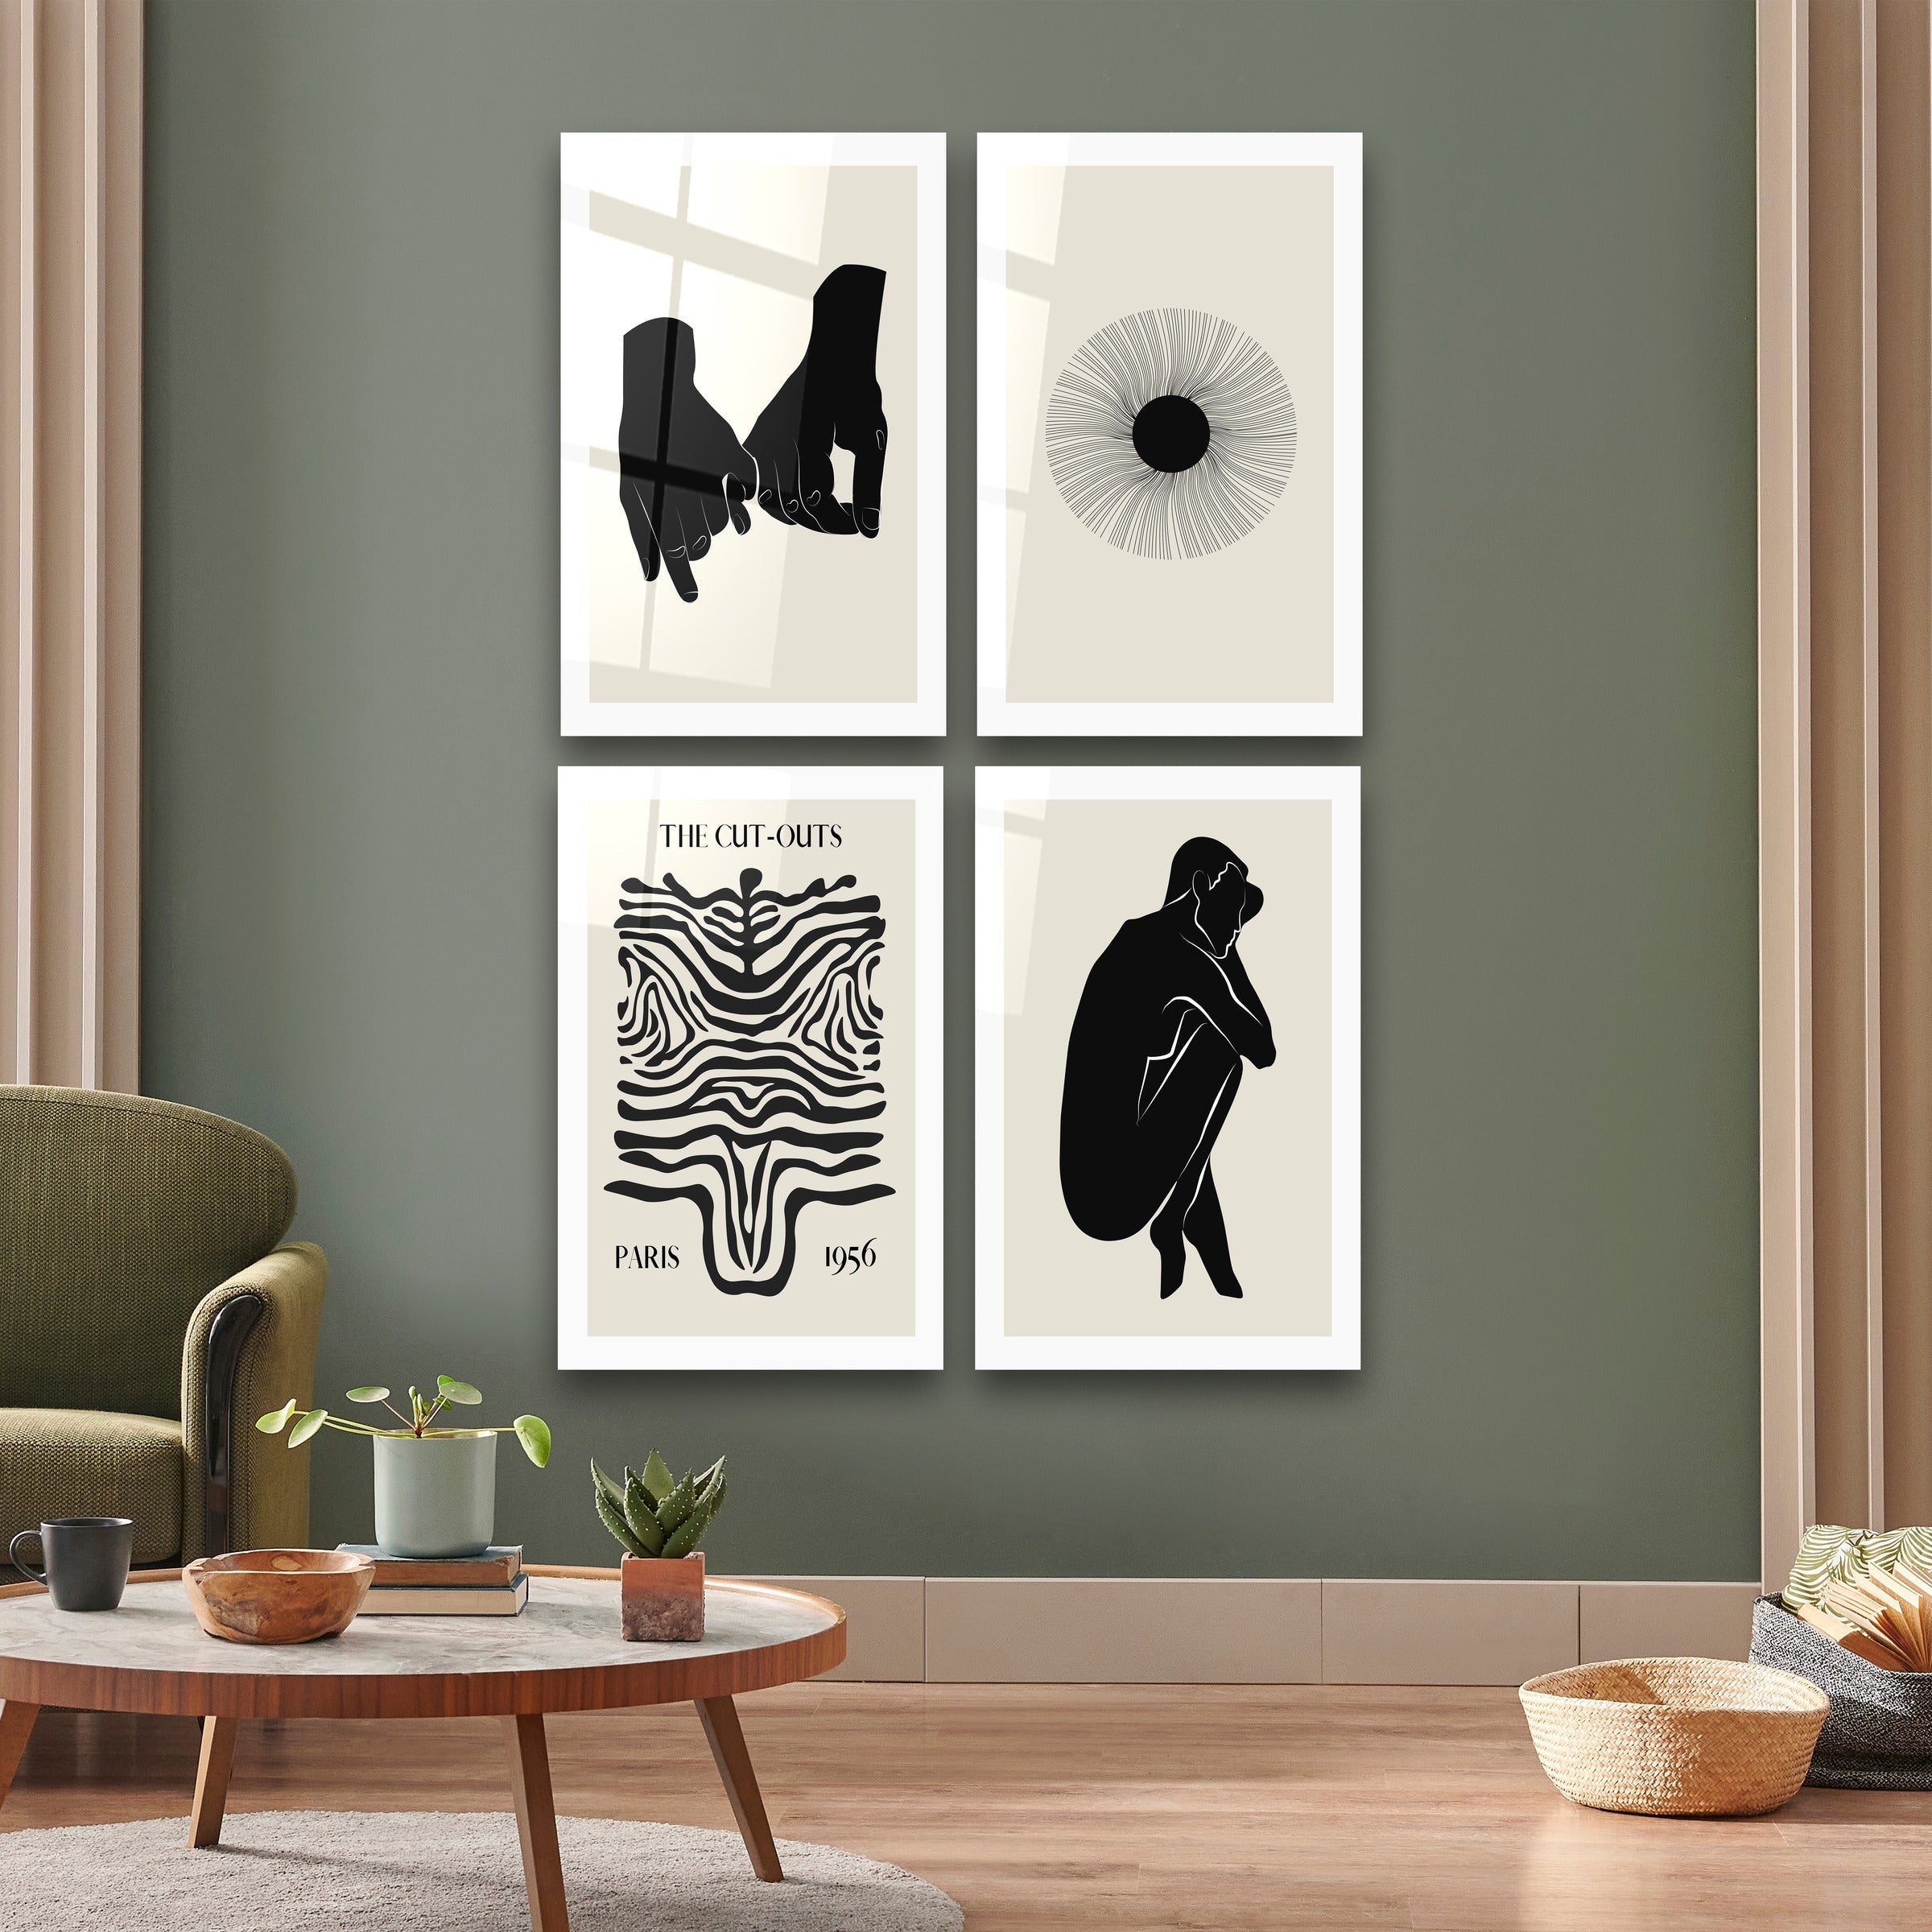 ."The Cut Outs Quadro v3". Contemporary Gallery Collection Glass Wall Art